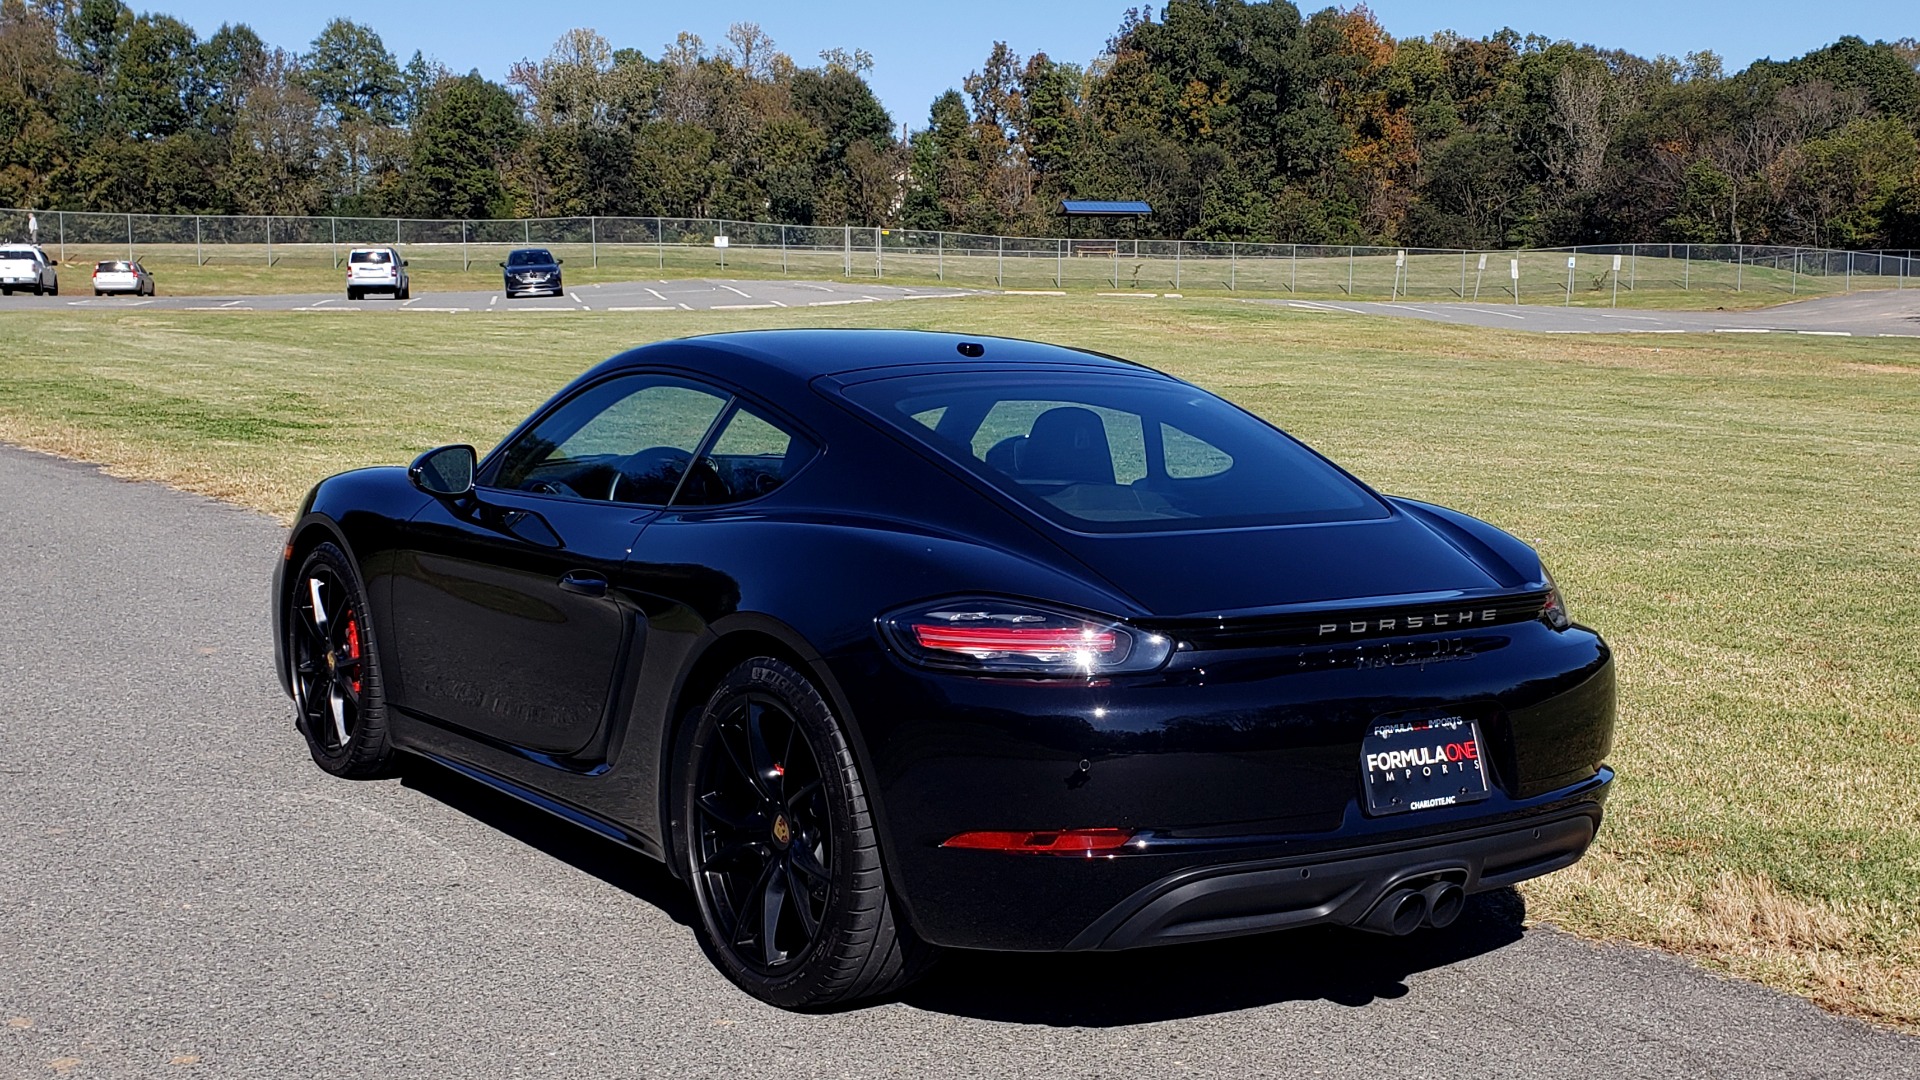 Used 2019 Porsche 718 CAYMAN S COUPE / PDK TRANS / LCA / BOSE / HTD STS / LIGHT DESIGN PKG for sale Sold at Formula Imports in Charlotte NC 28227 5